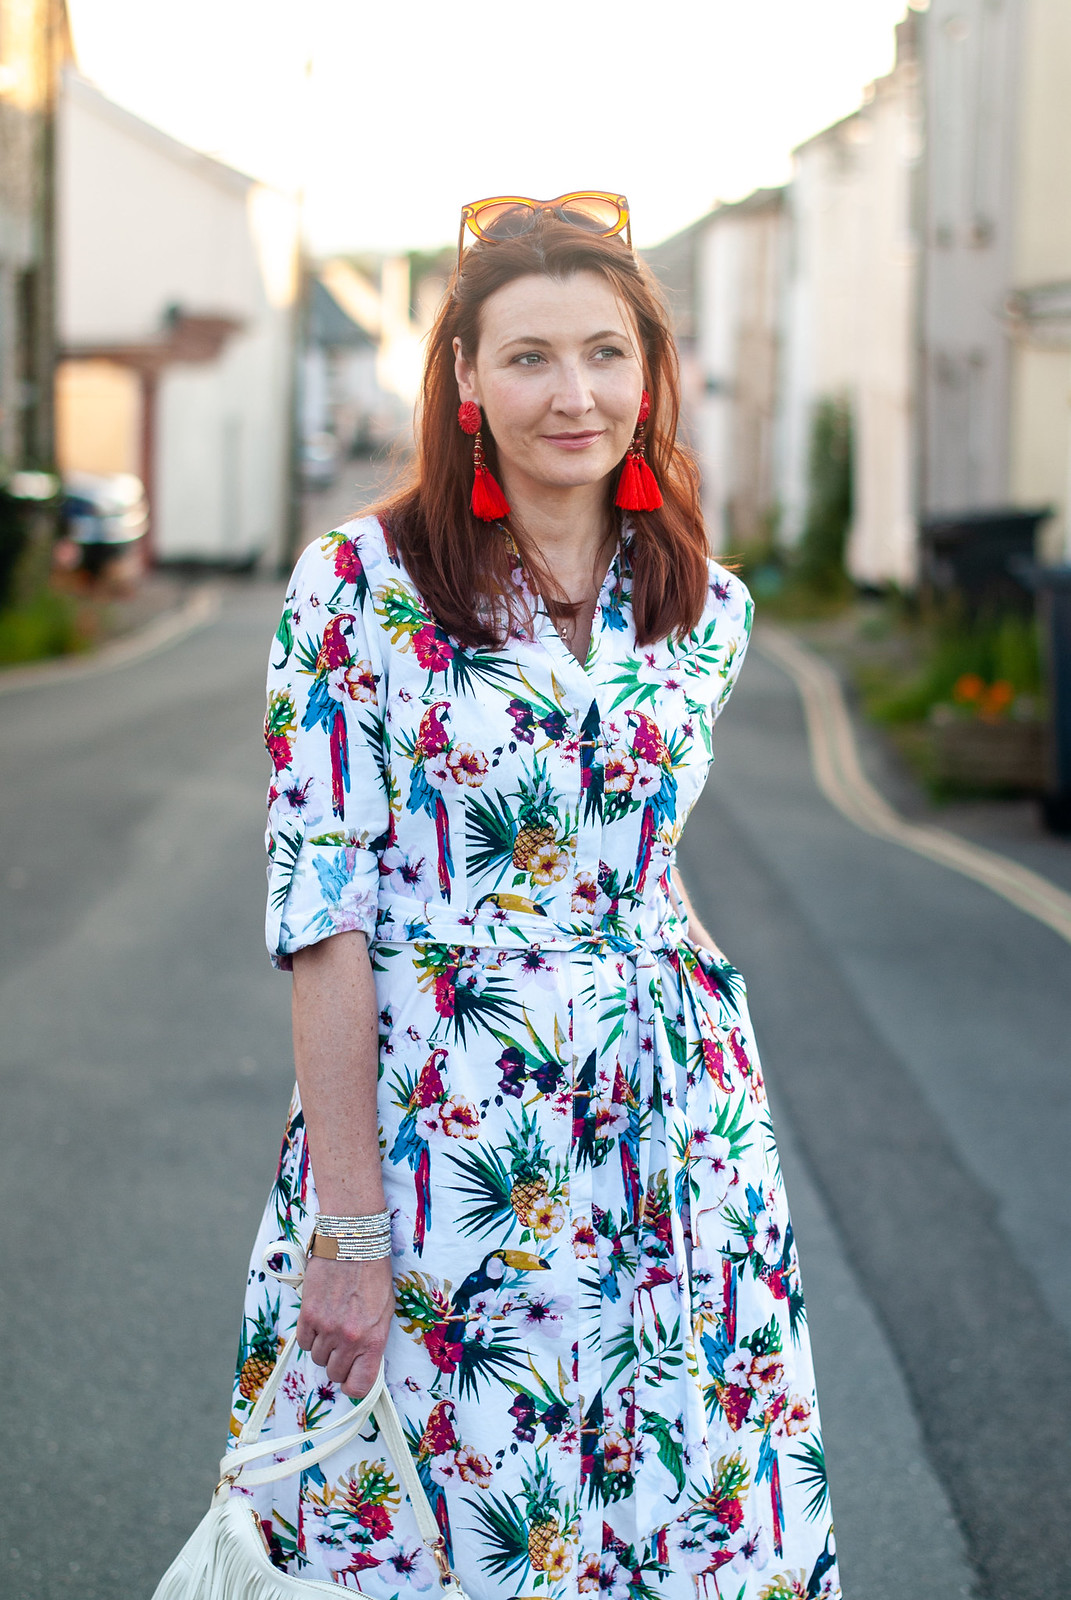 Florals With a Twist | A Loud Birds & Botanical Print \ botanical print midi shirt dress \ grey lace-up espadrilles \ red tassel earrings \ white fringed crossbody bag | Not Dressed As Lamb, over 40 style